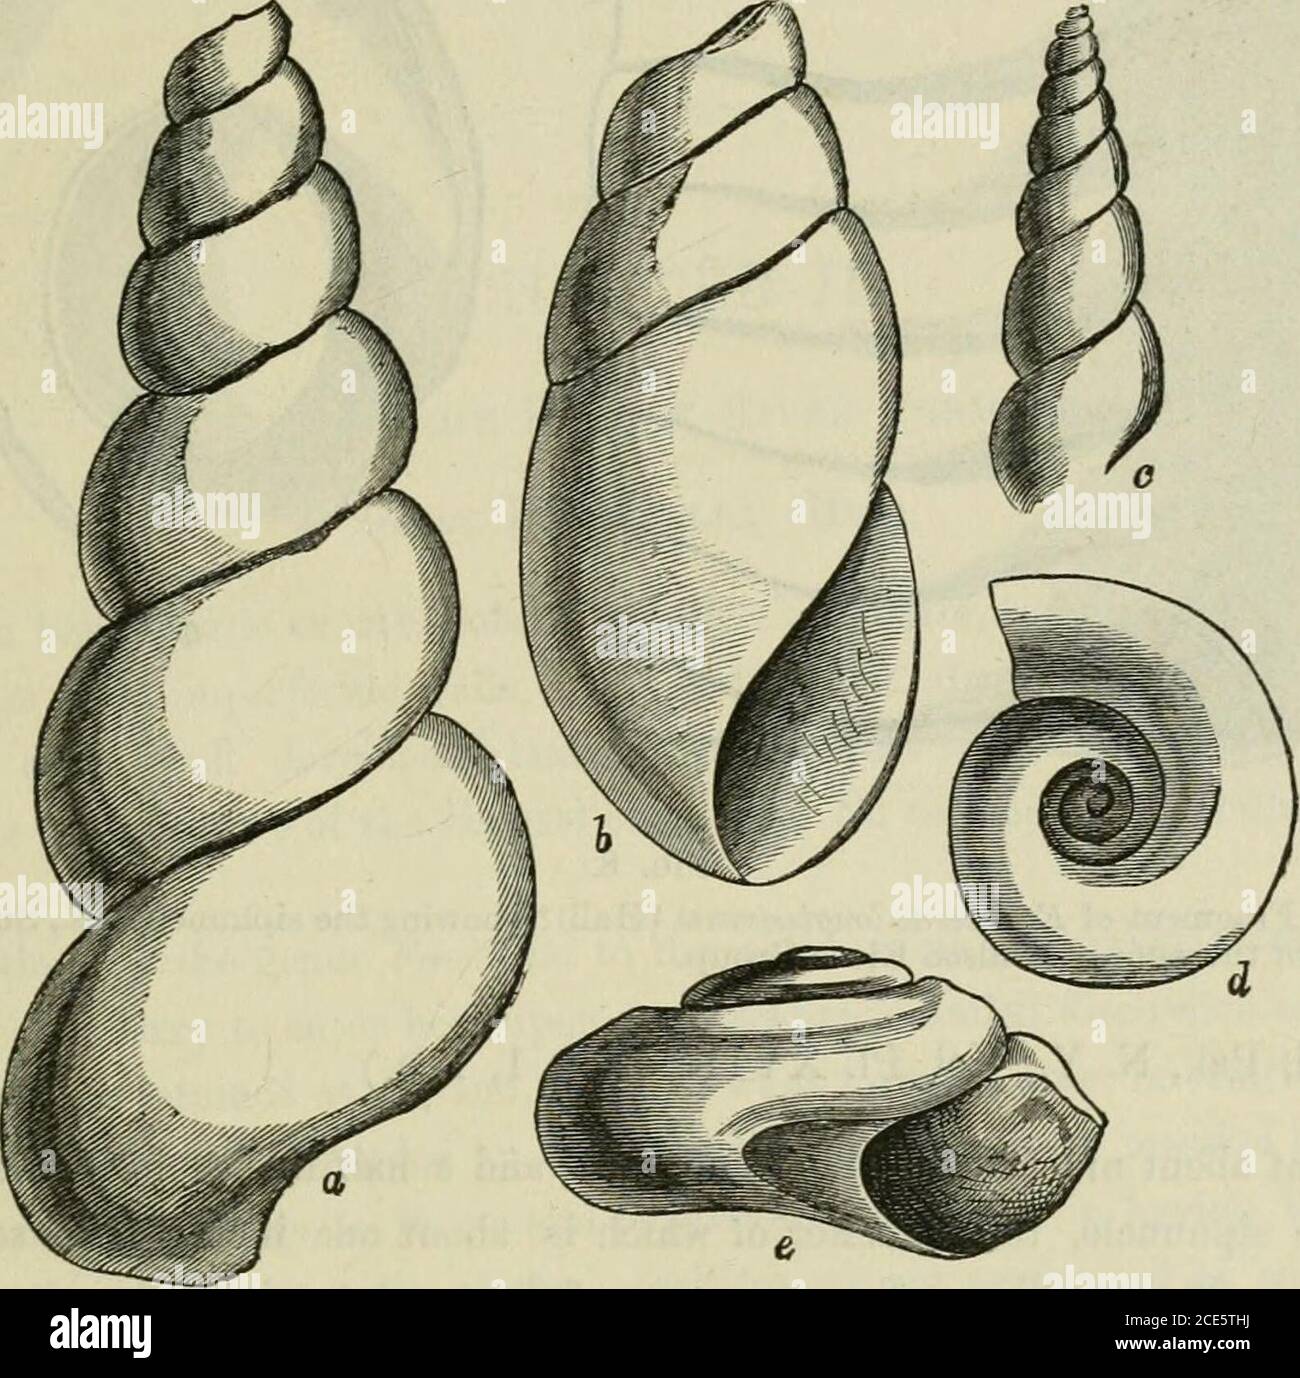 . Ontario Sessional Papers, 1874, No.4-26 . —e). Casts of this species may usually be dictinguished by the small size and slender form ofthe shell, and the convex, not angulated whoris. Locality and Formation, Trenton Limestone, Trenton and Collingwood. 38. Murchisonia subpusuormis (Hall).Fig. lb. {Ref Pal. N.Y., Vol. I., Plate XXXIX., Figs. -la-b). This species has also only come uoder my notice in the condition of casts, which arereadily distinguished by the comparative flatness of the whorls, and their obliquity. Thebody-whorl is ventricose and considerably elongated. It is quite probable t Stock Photo